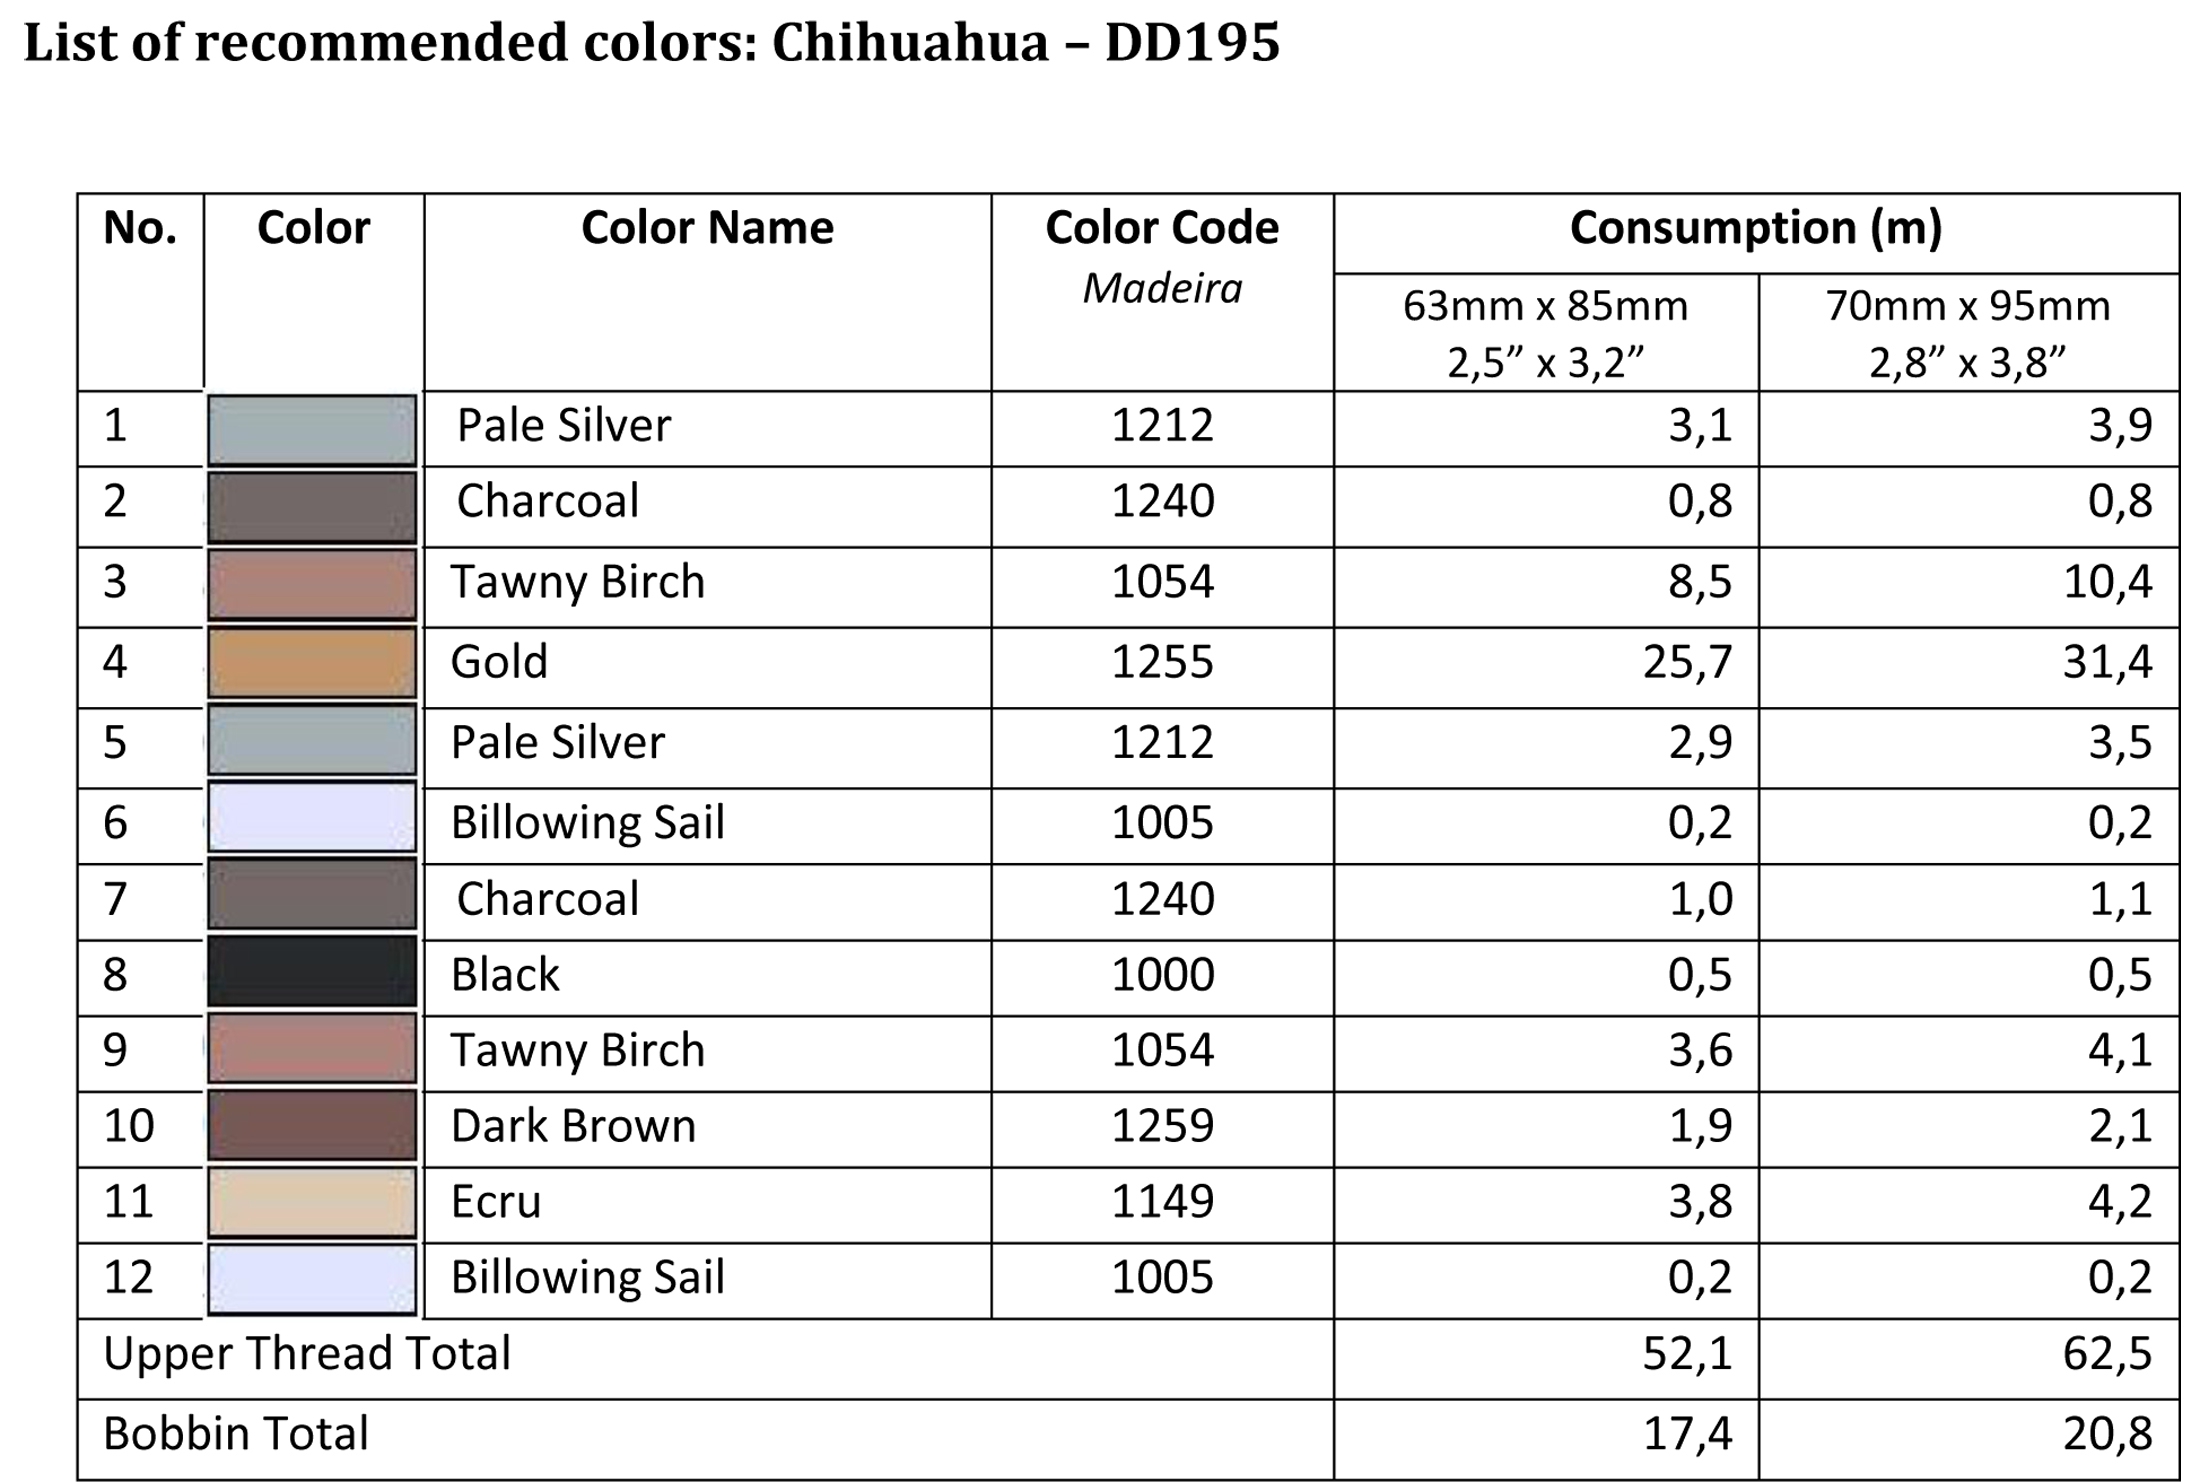 List of recommended colors - DD195